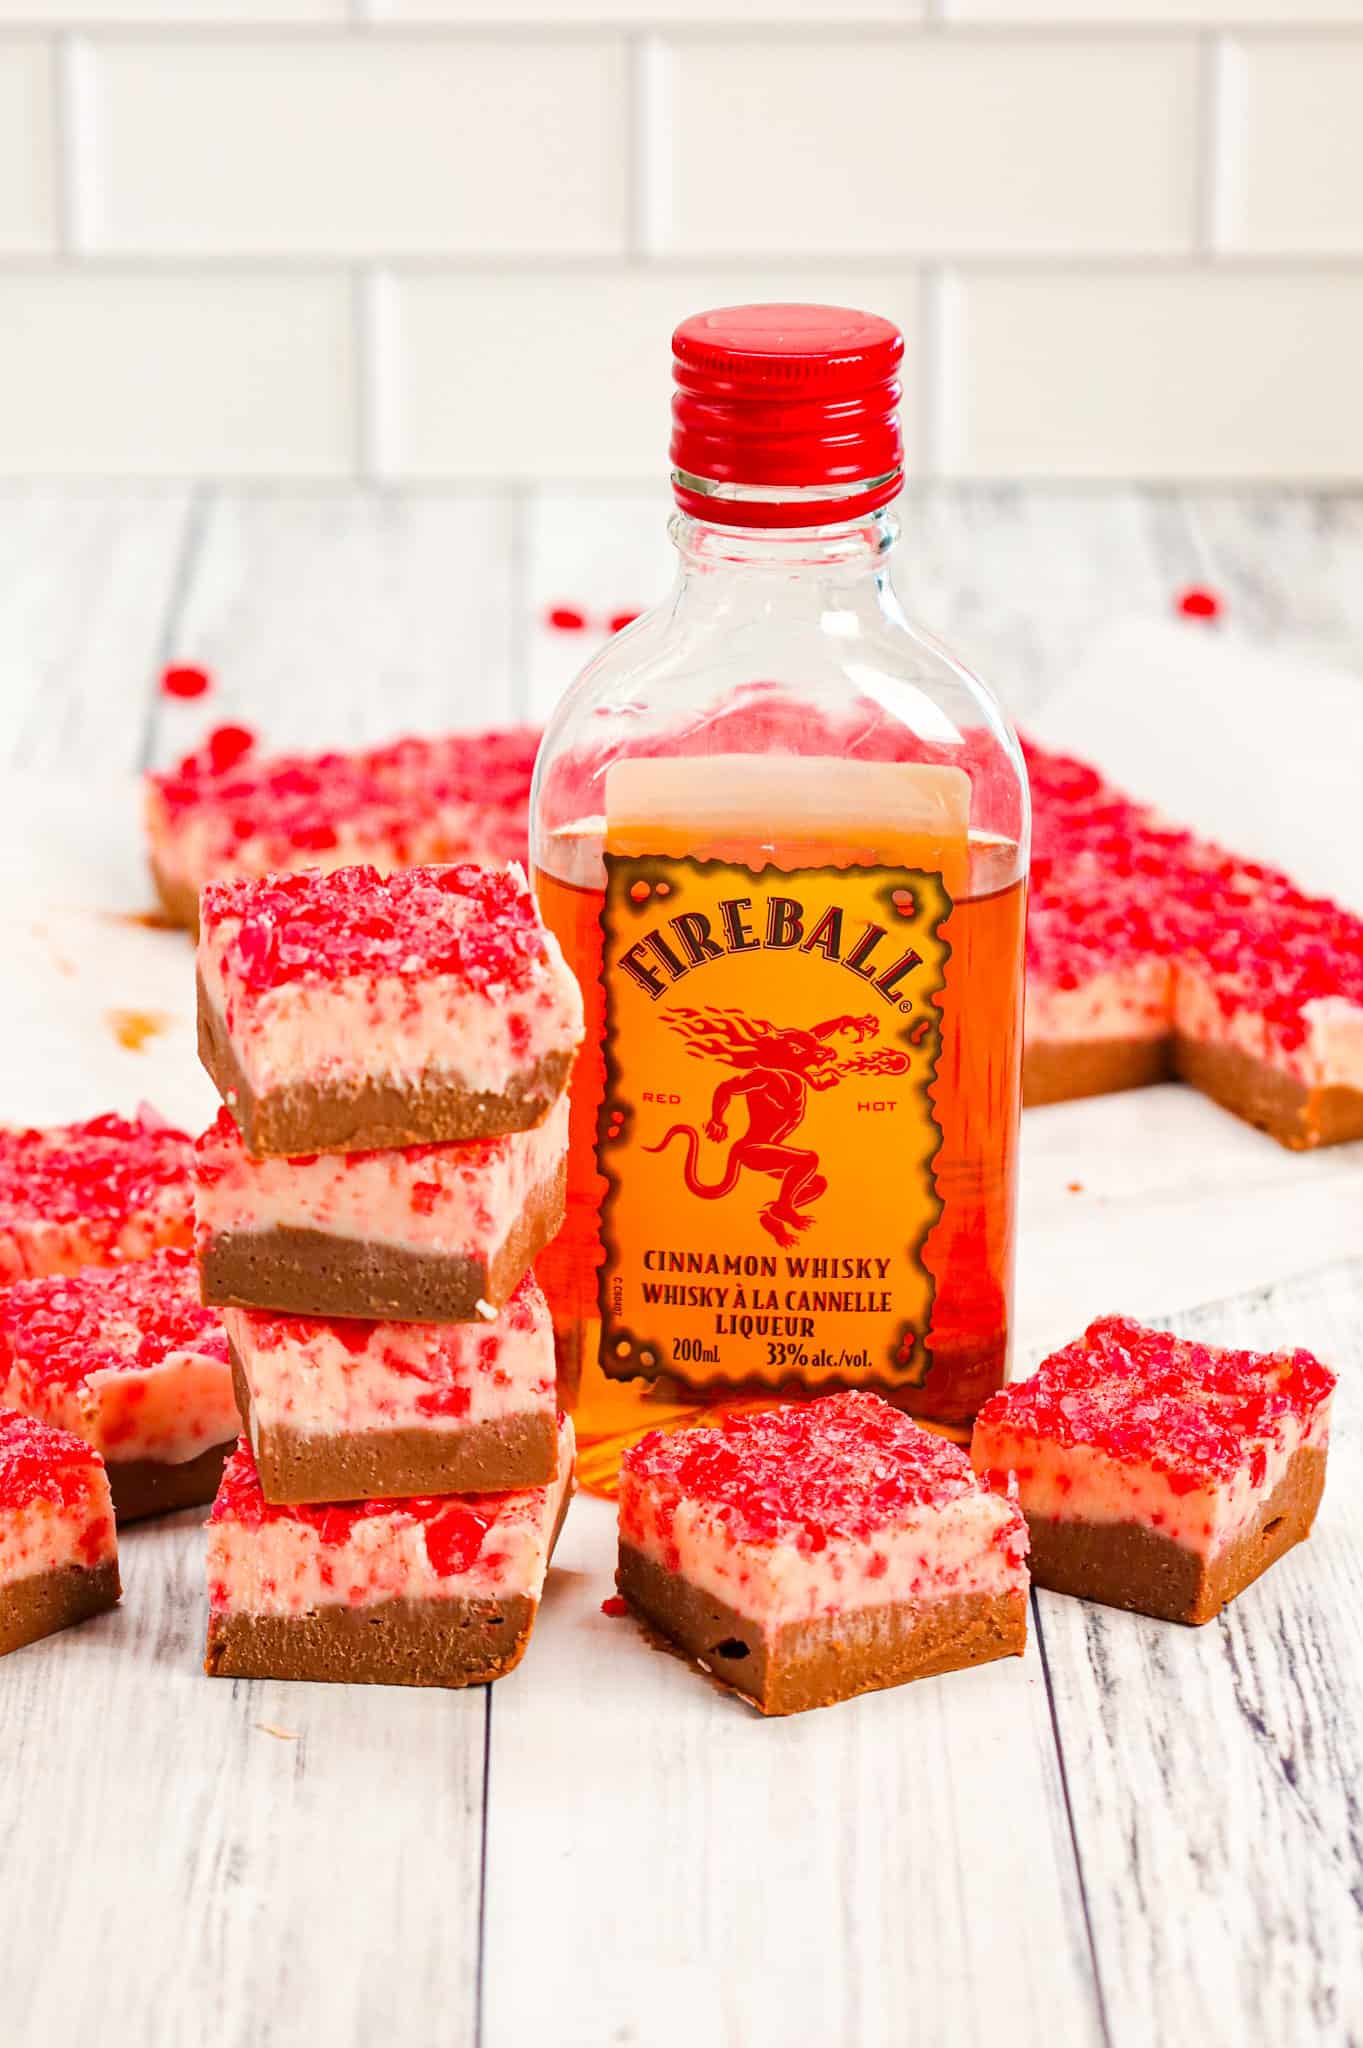 Fireball Fudge is a simple microwave fudge recipe with a milk chocolate layer and a white chocolate layer both containing Fireball cinnamon whisky and topped with crushed cinnamon hearts.